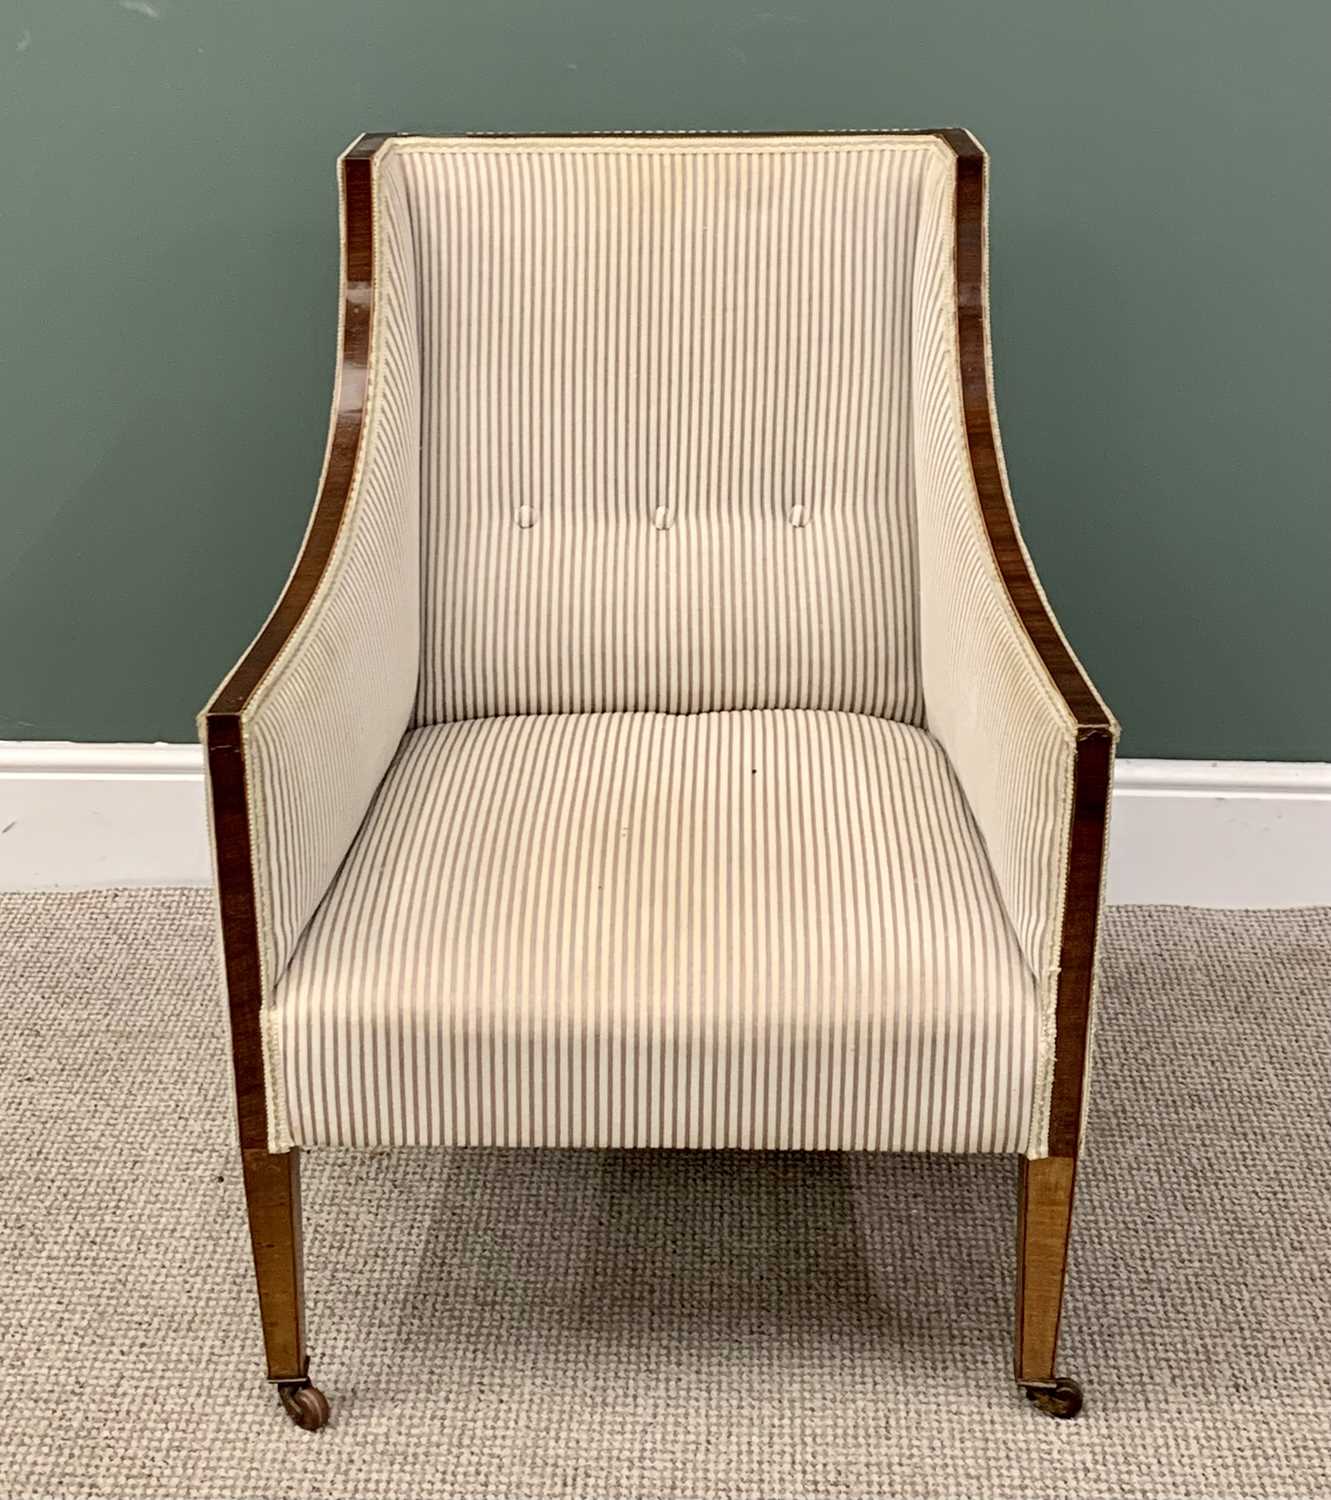 REGENCY-STYLE EDWARDIAN UPHOLSTERED EASY CHAIR in button back striped upholstery, on tapered front